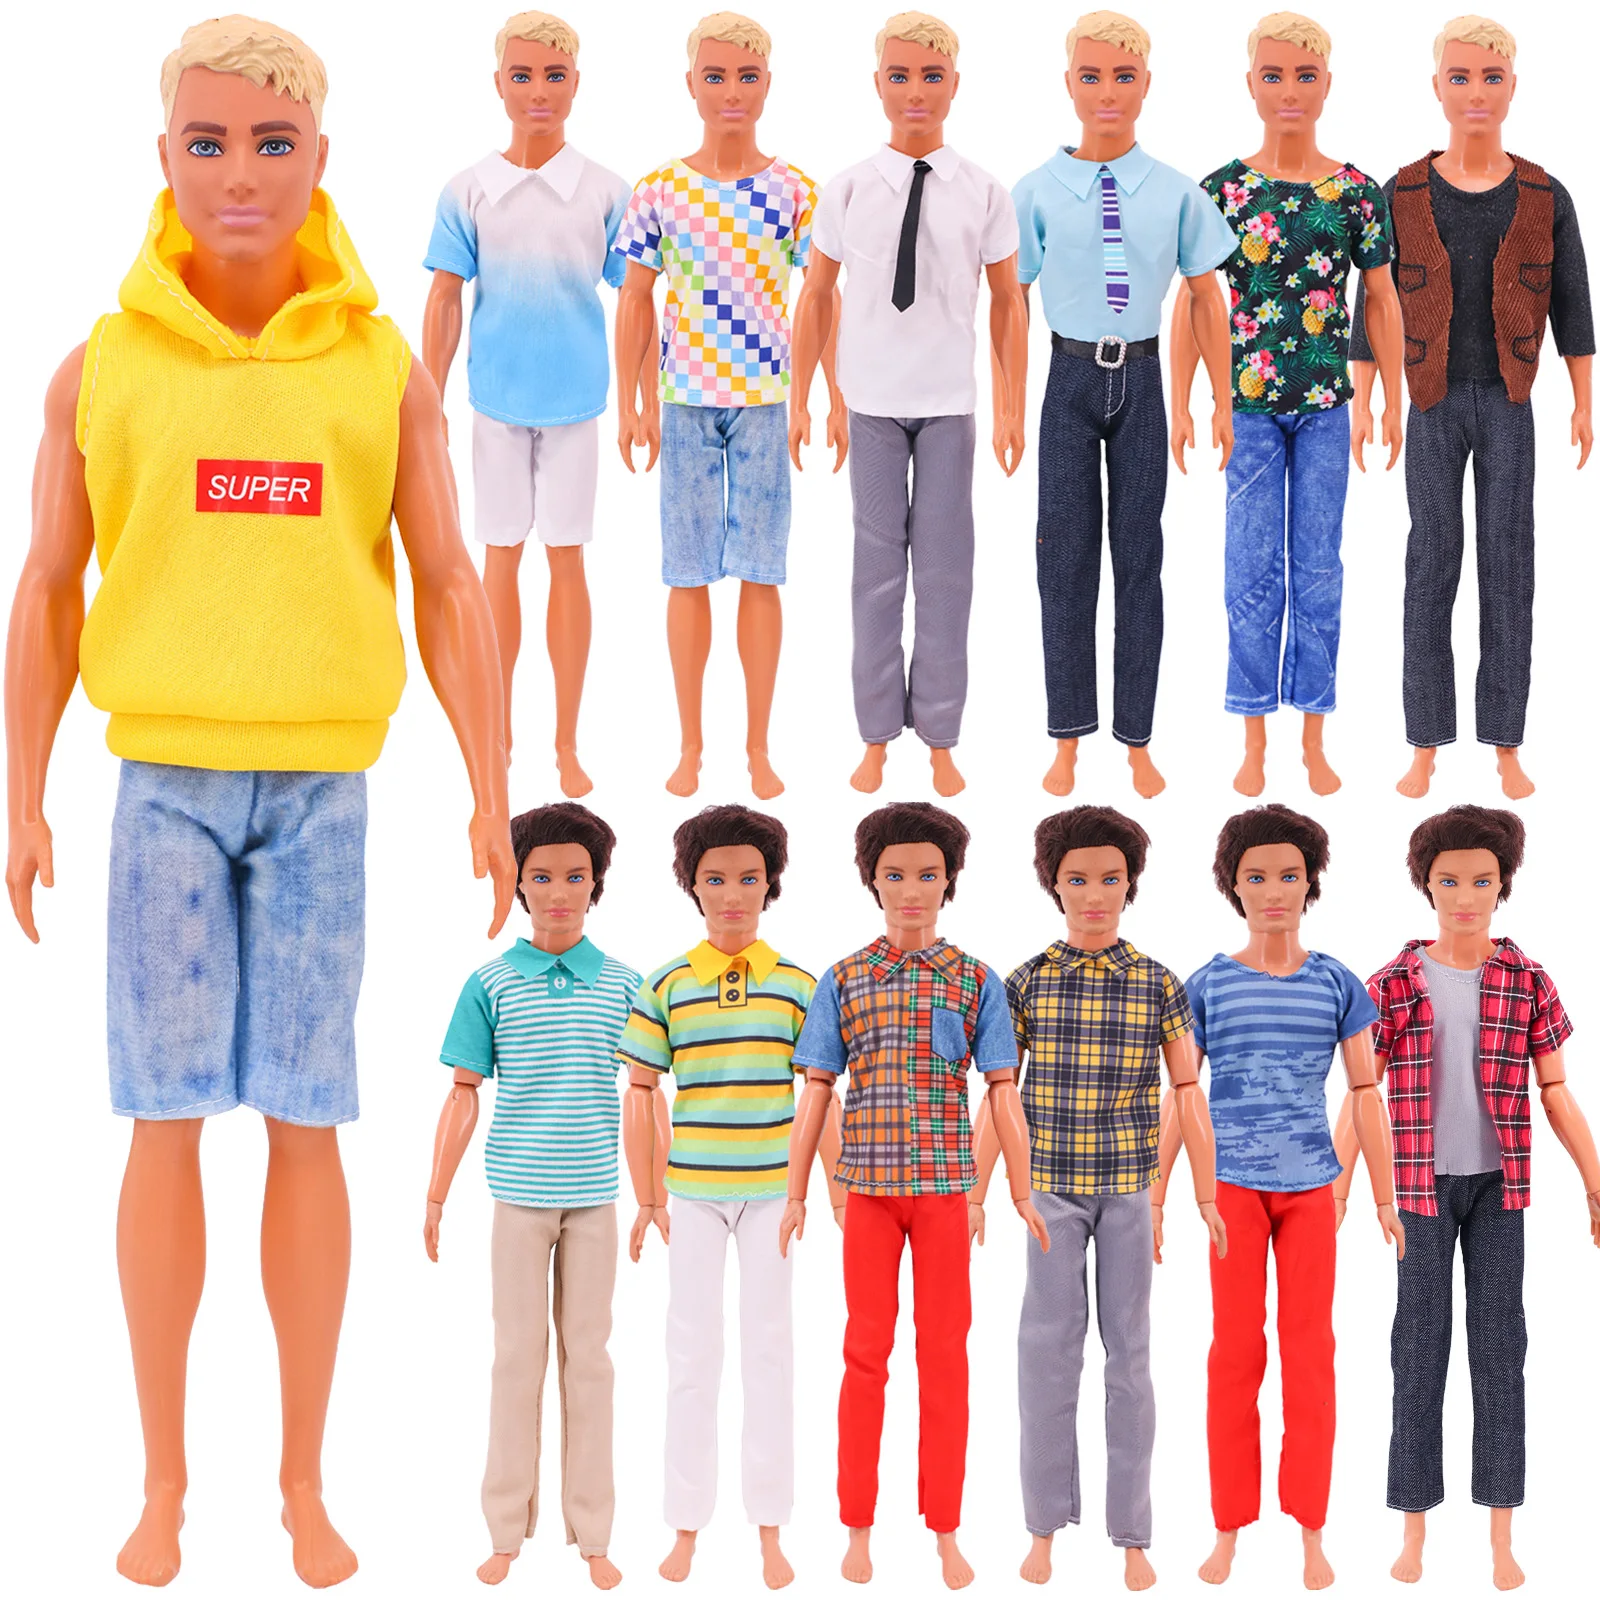 Ken Boy Doll Clothes Handmade Hoodie Shirt Short Sleeve Trousers Fashion Summer New Product For 11.8 Inch Boy Dolls Children Toy children pu leather belts boys girls kid waist strap waistband metal buckle for jeans pants trousers dress adjustable belt